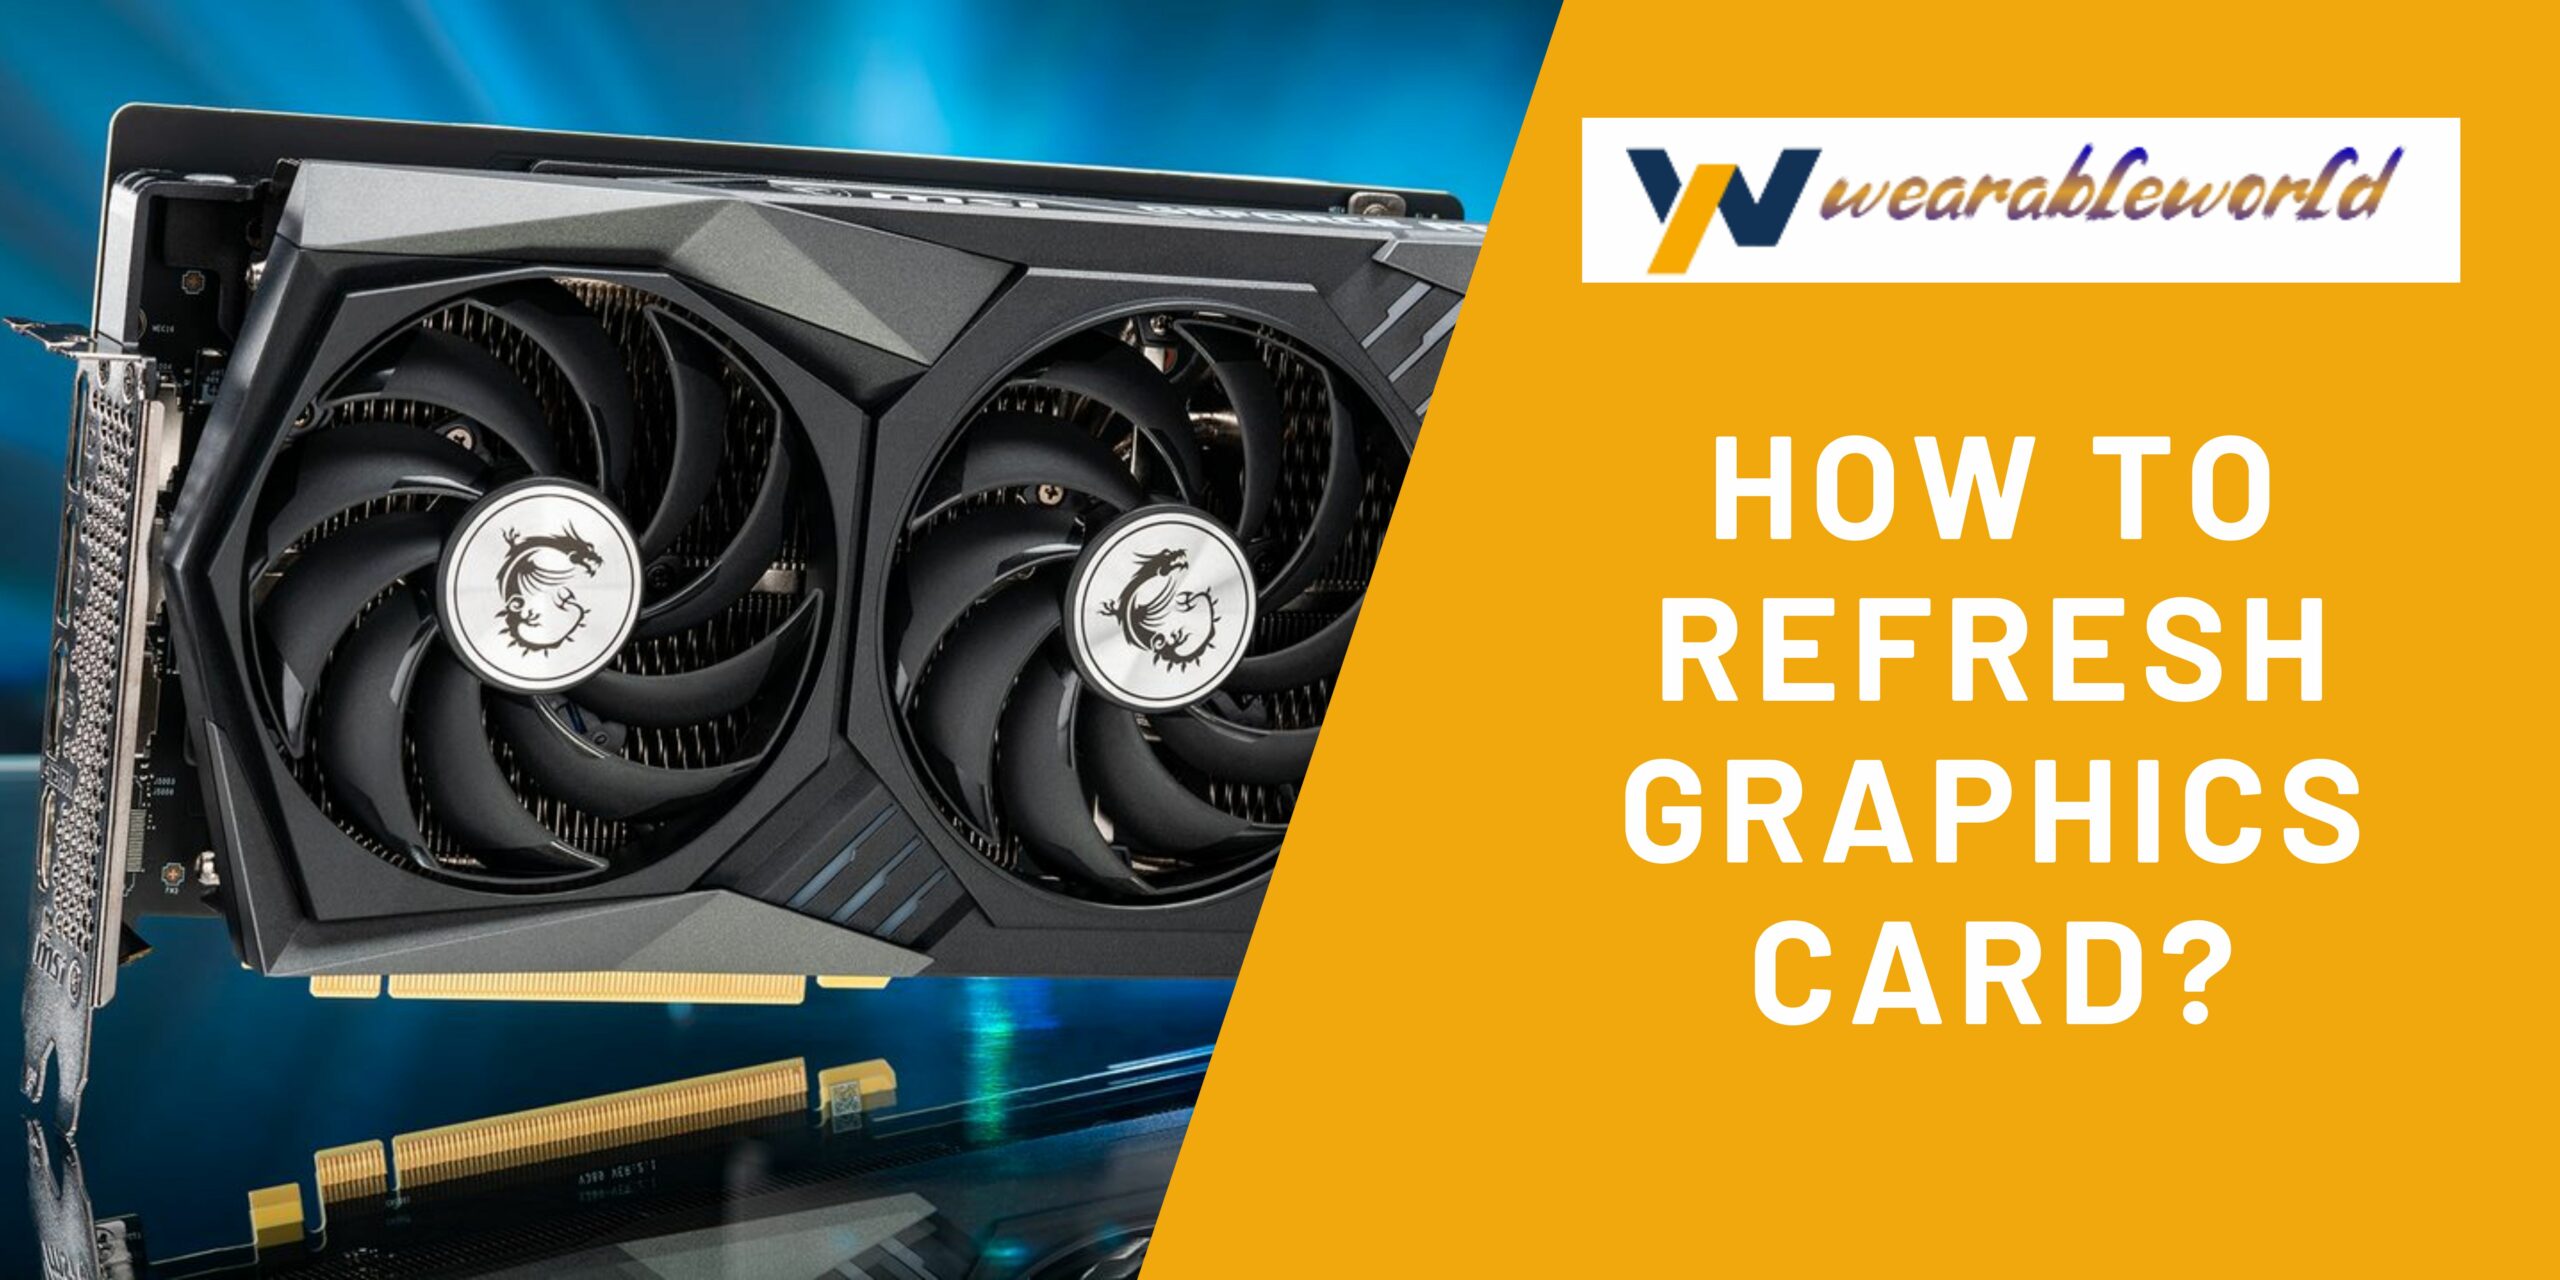 How to Refresh Graphics Card